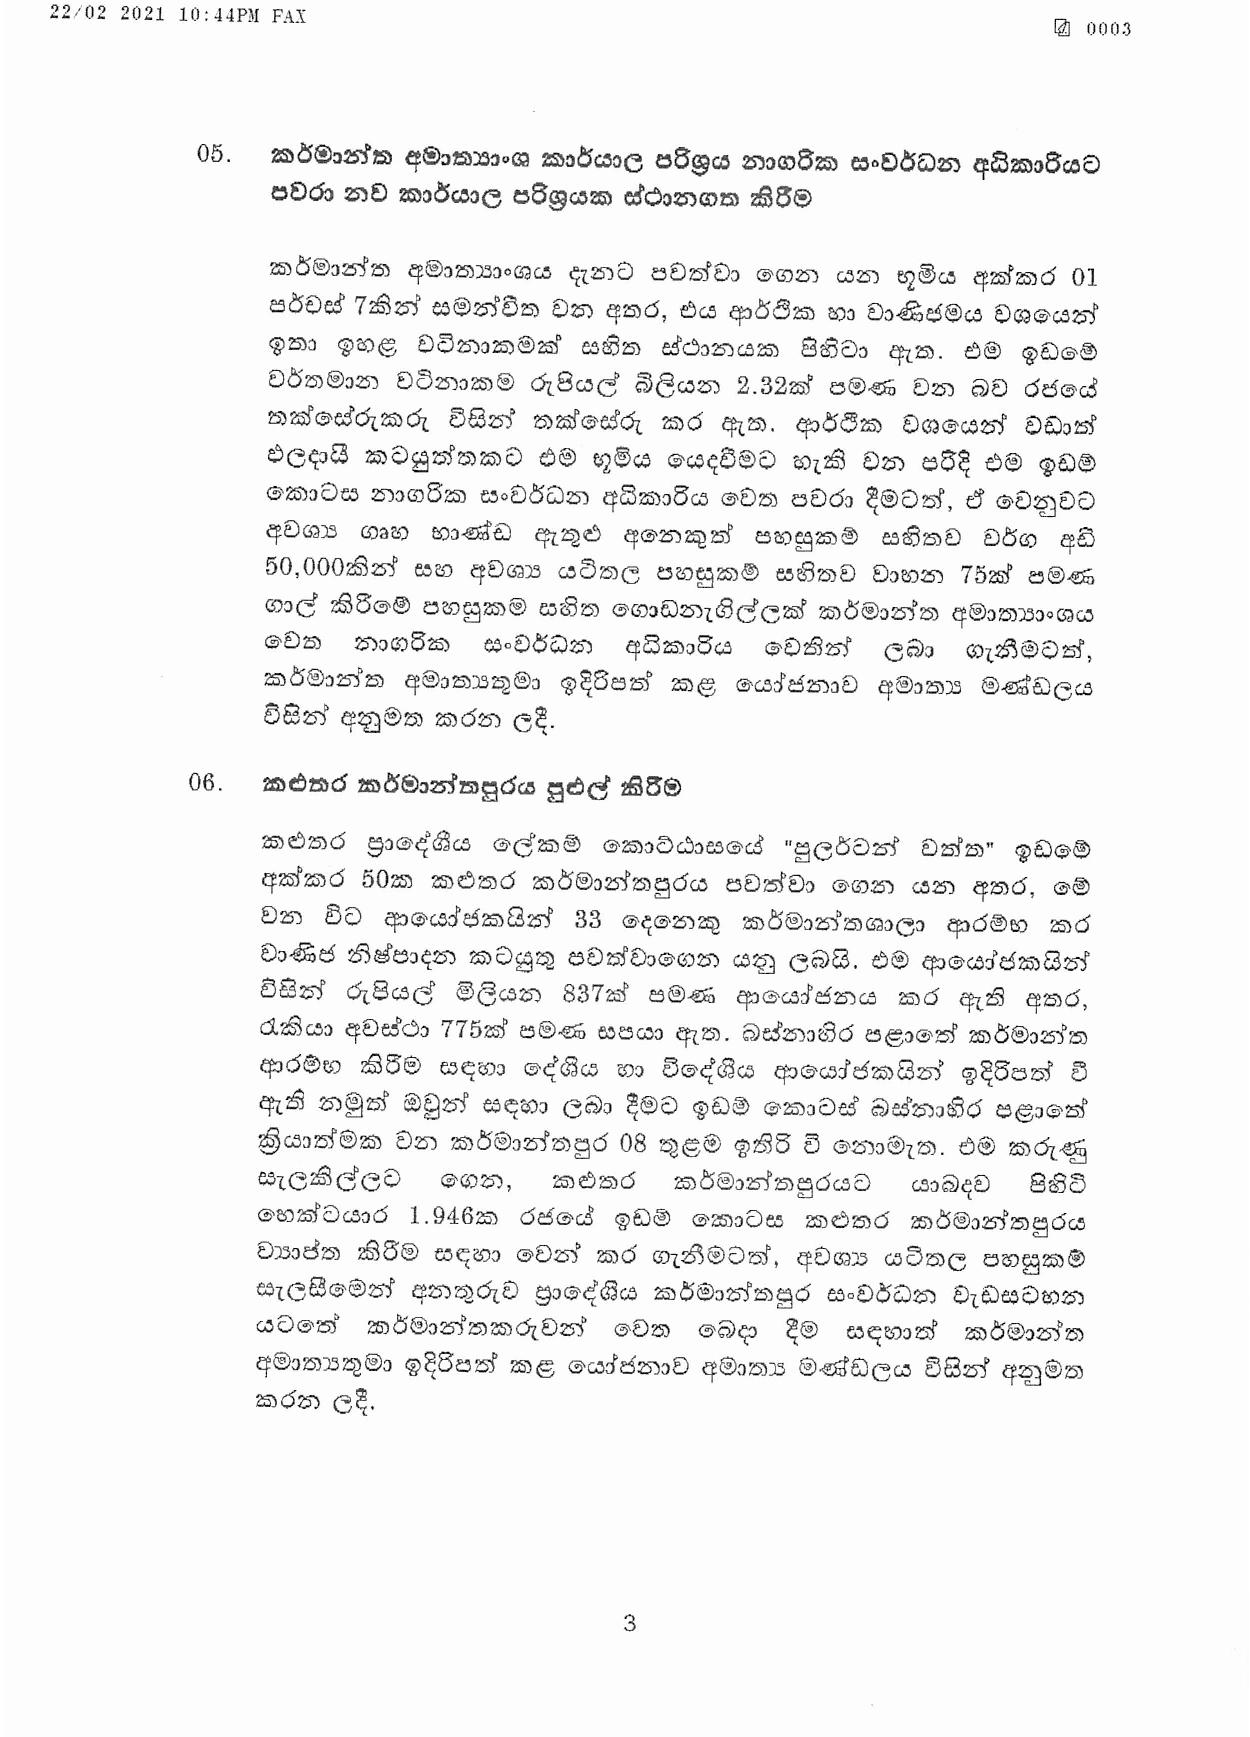 Cabinet Decision on 22.02.2021 page 003